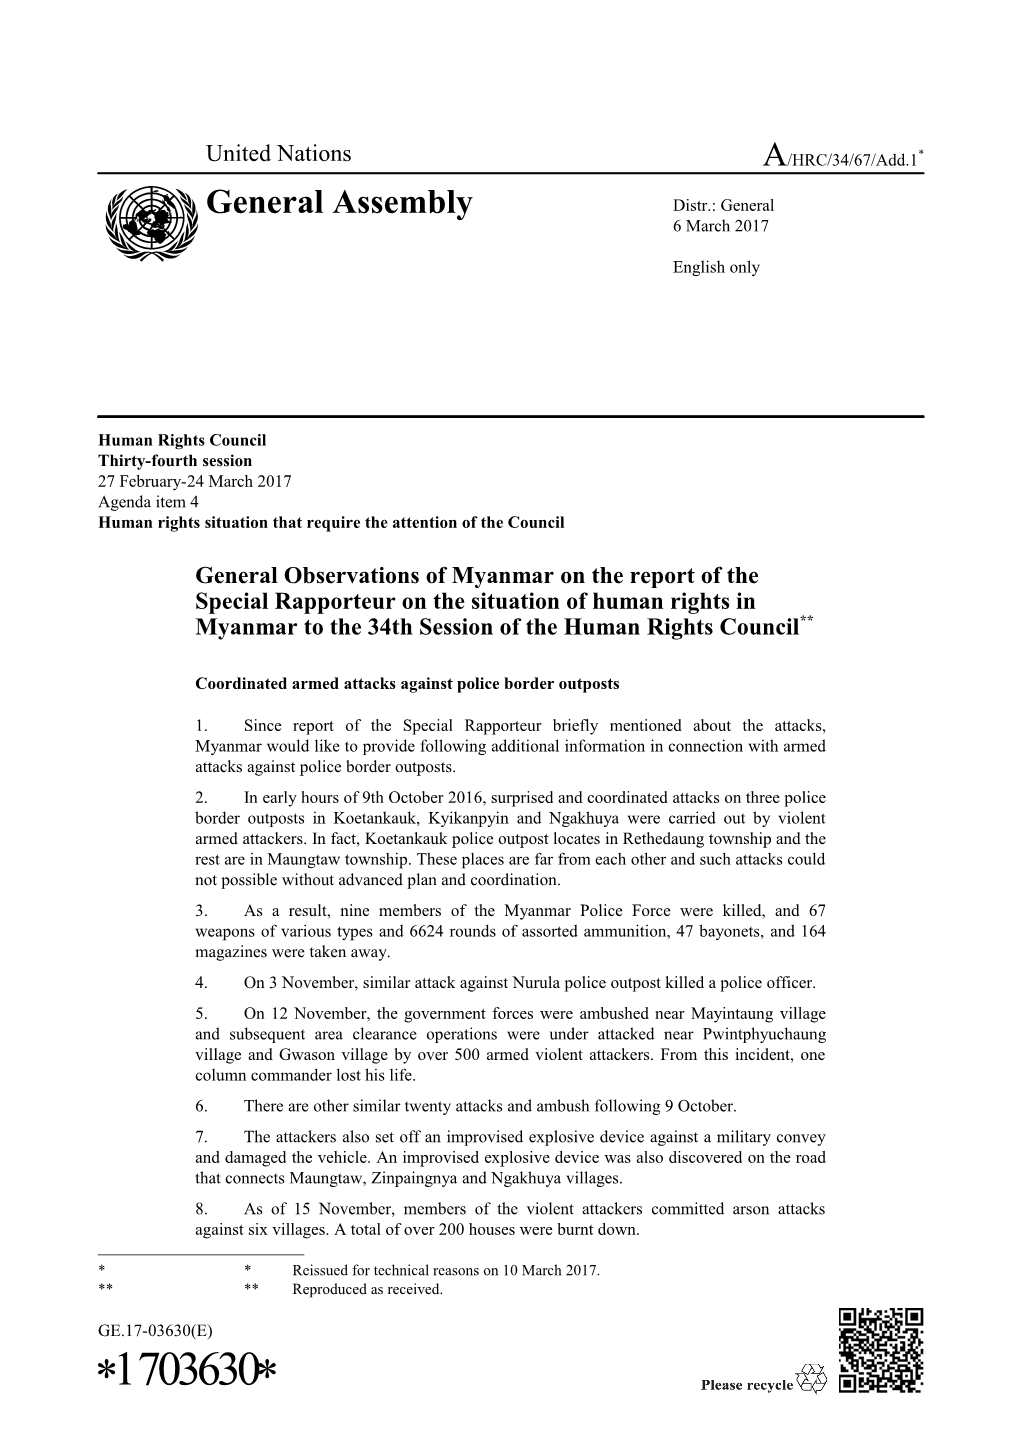 Addendum - General Observations of Myanmar on the Report of the Special Rapporteur on The